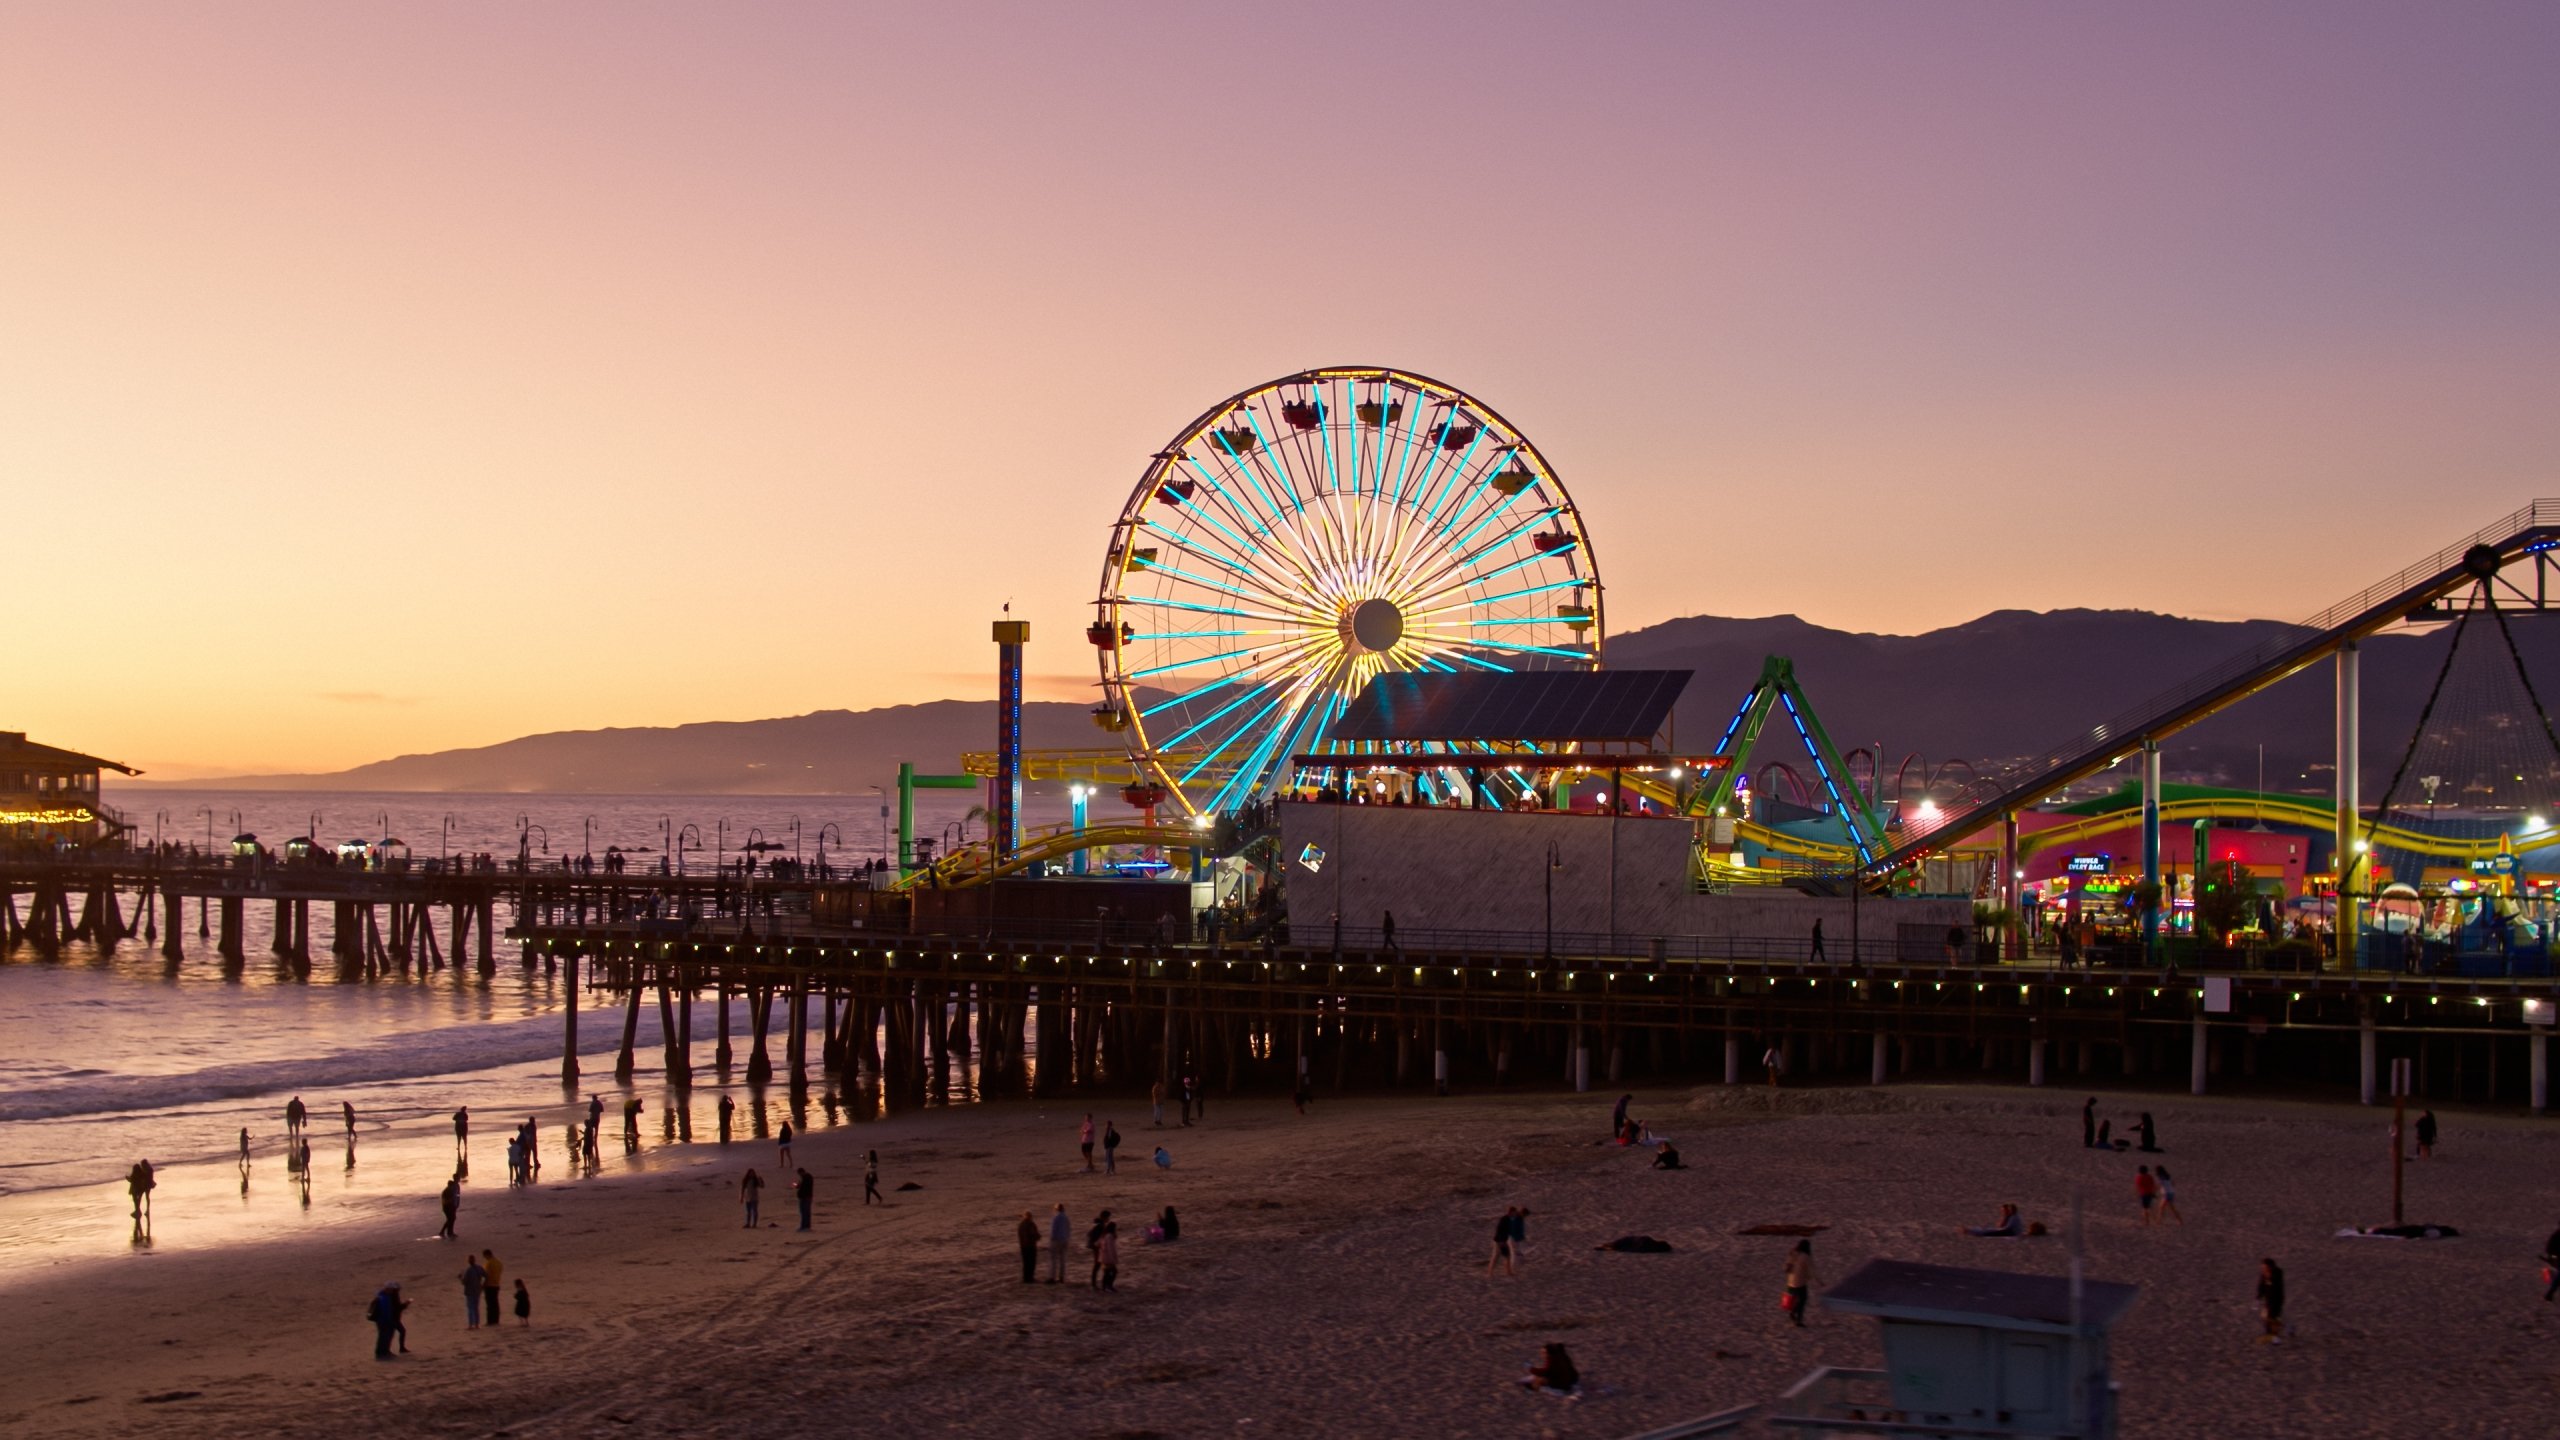 Aerial view of the Santa Monica Pier with a ferris wheel lit up and the sun setting behind it